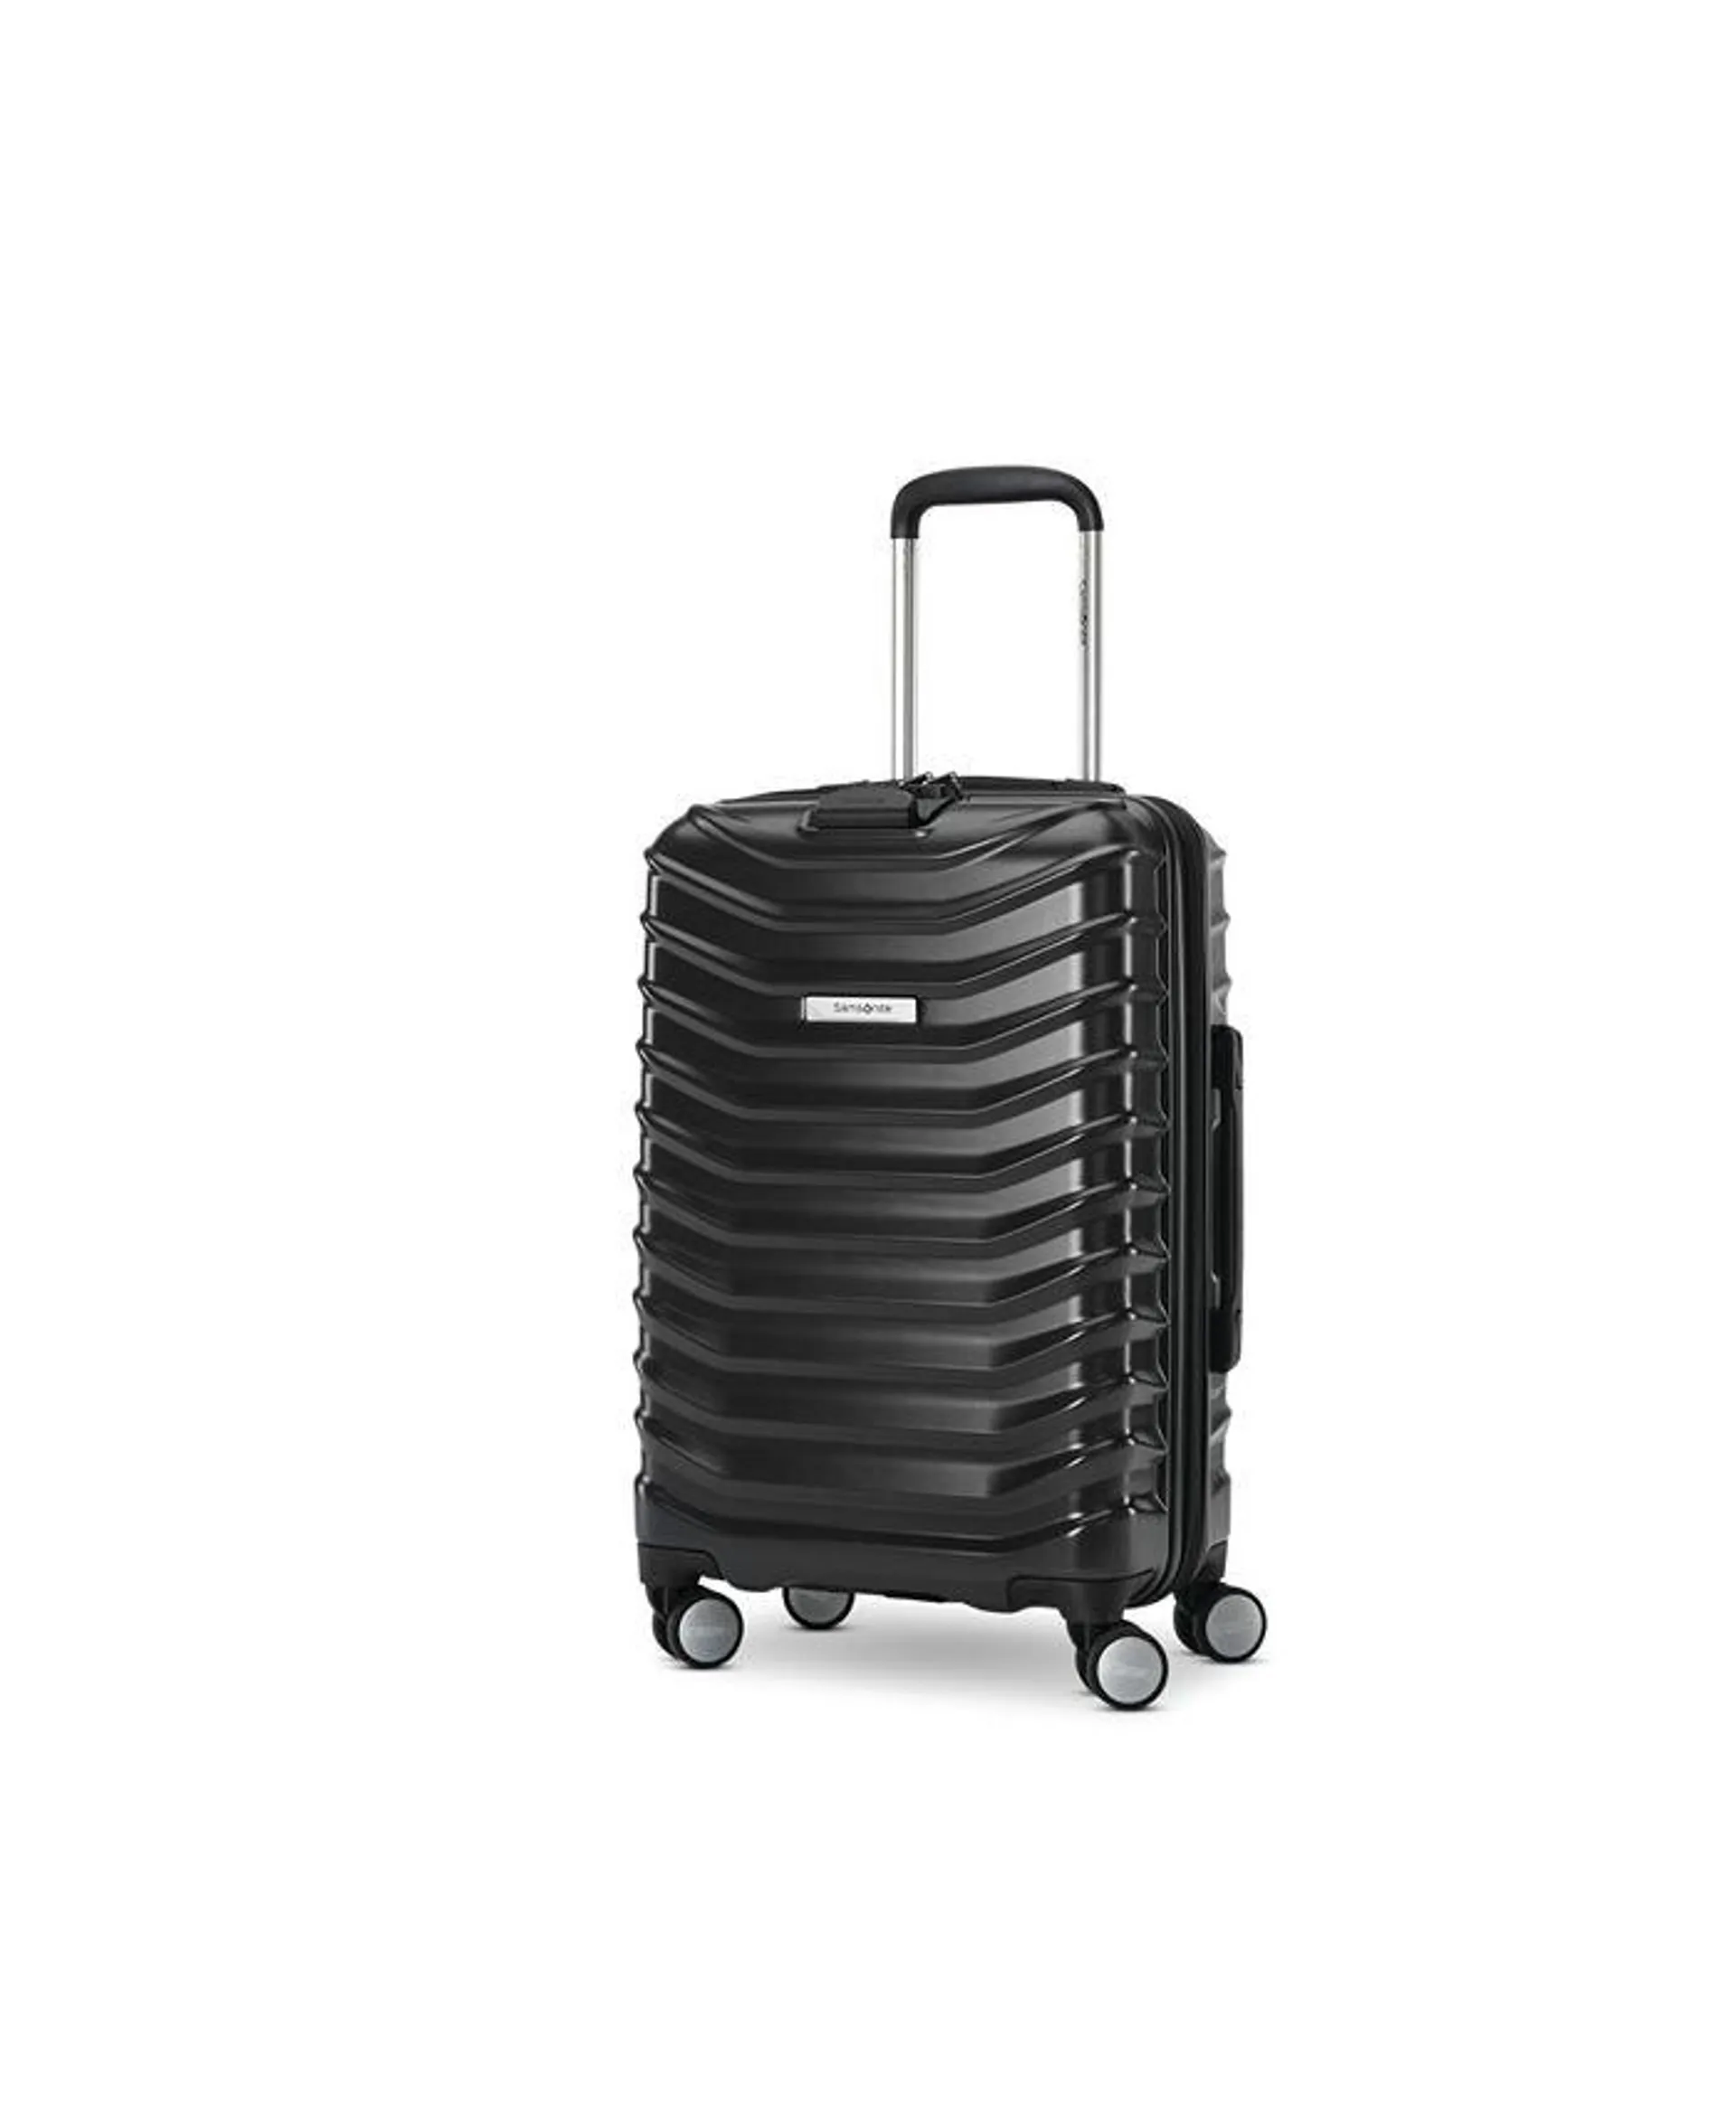 Spin Tech 5 20" Carry-on Spinner, Created for Macy's